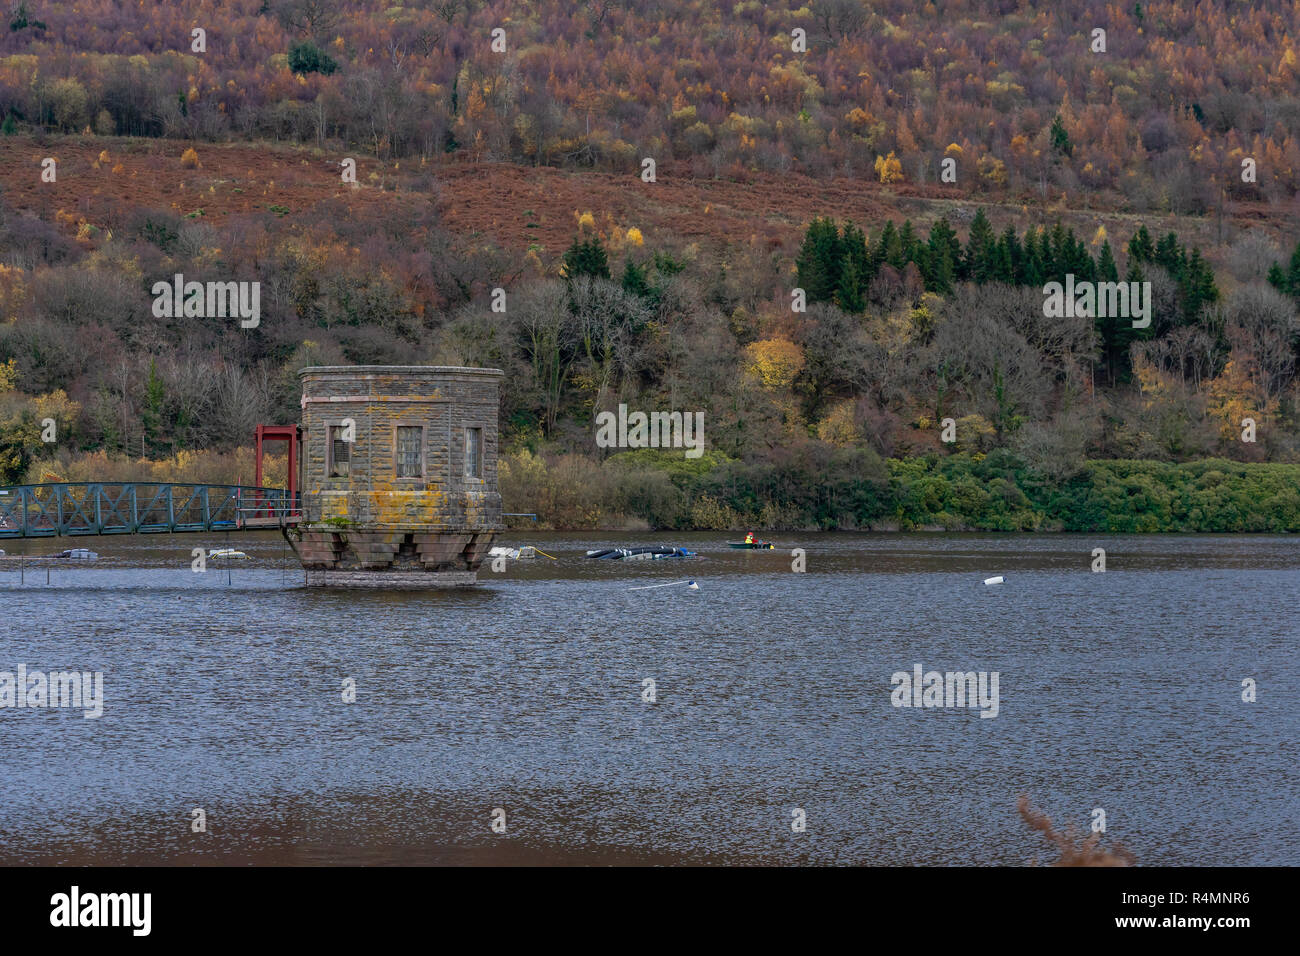 The reservoir valve tower at Talybont Reservoir in the Brecon Beacons National Park during autumn, Powys, South Wales, UK Stock Photo